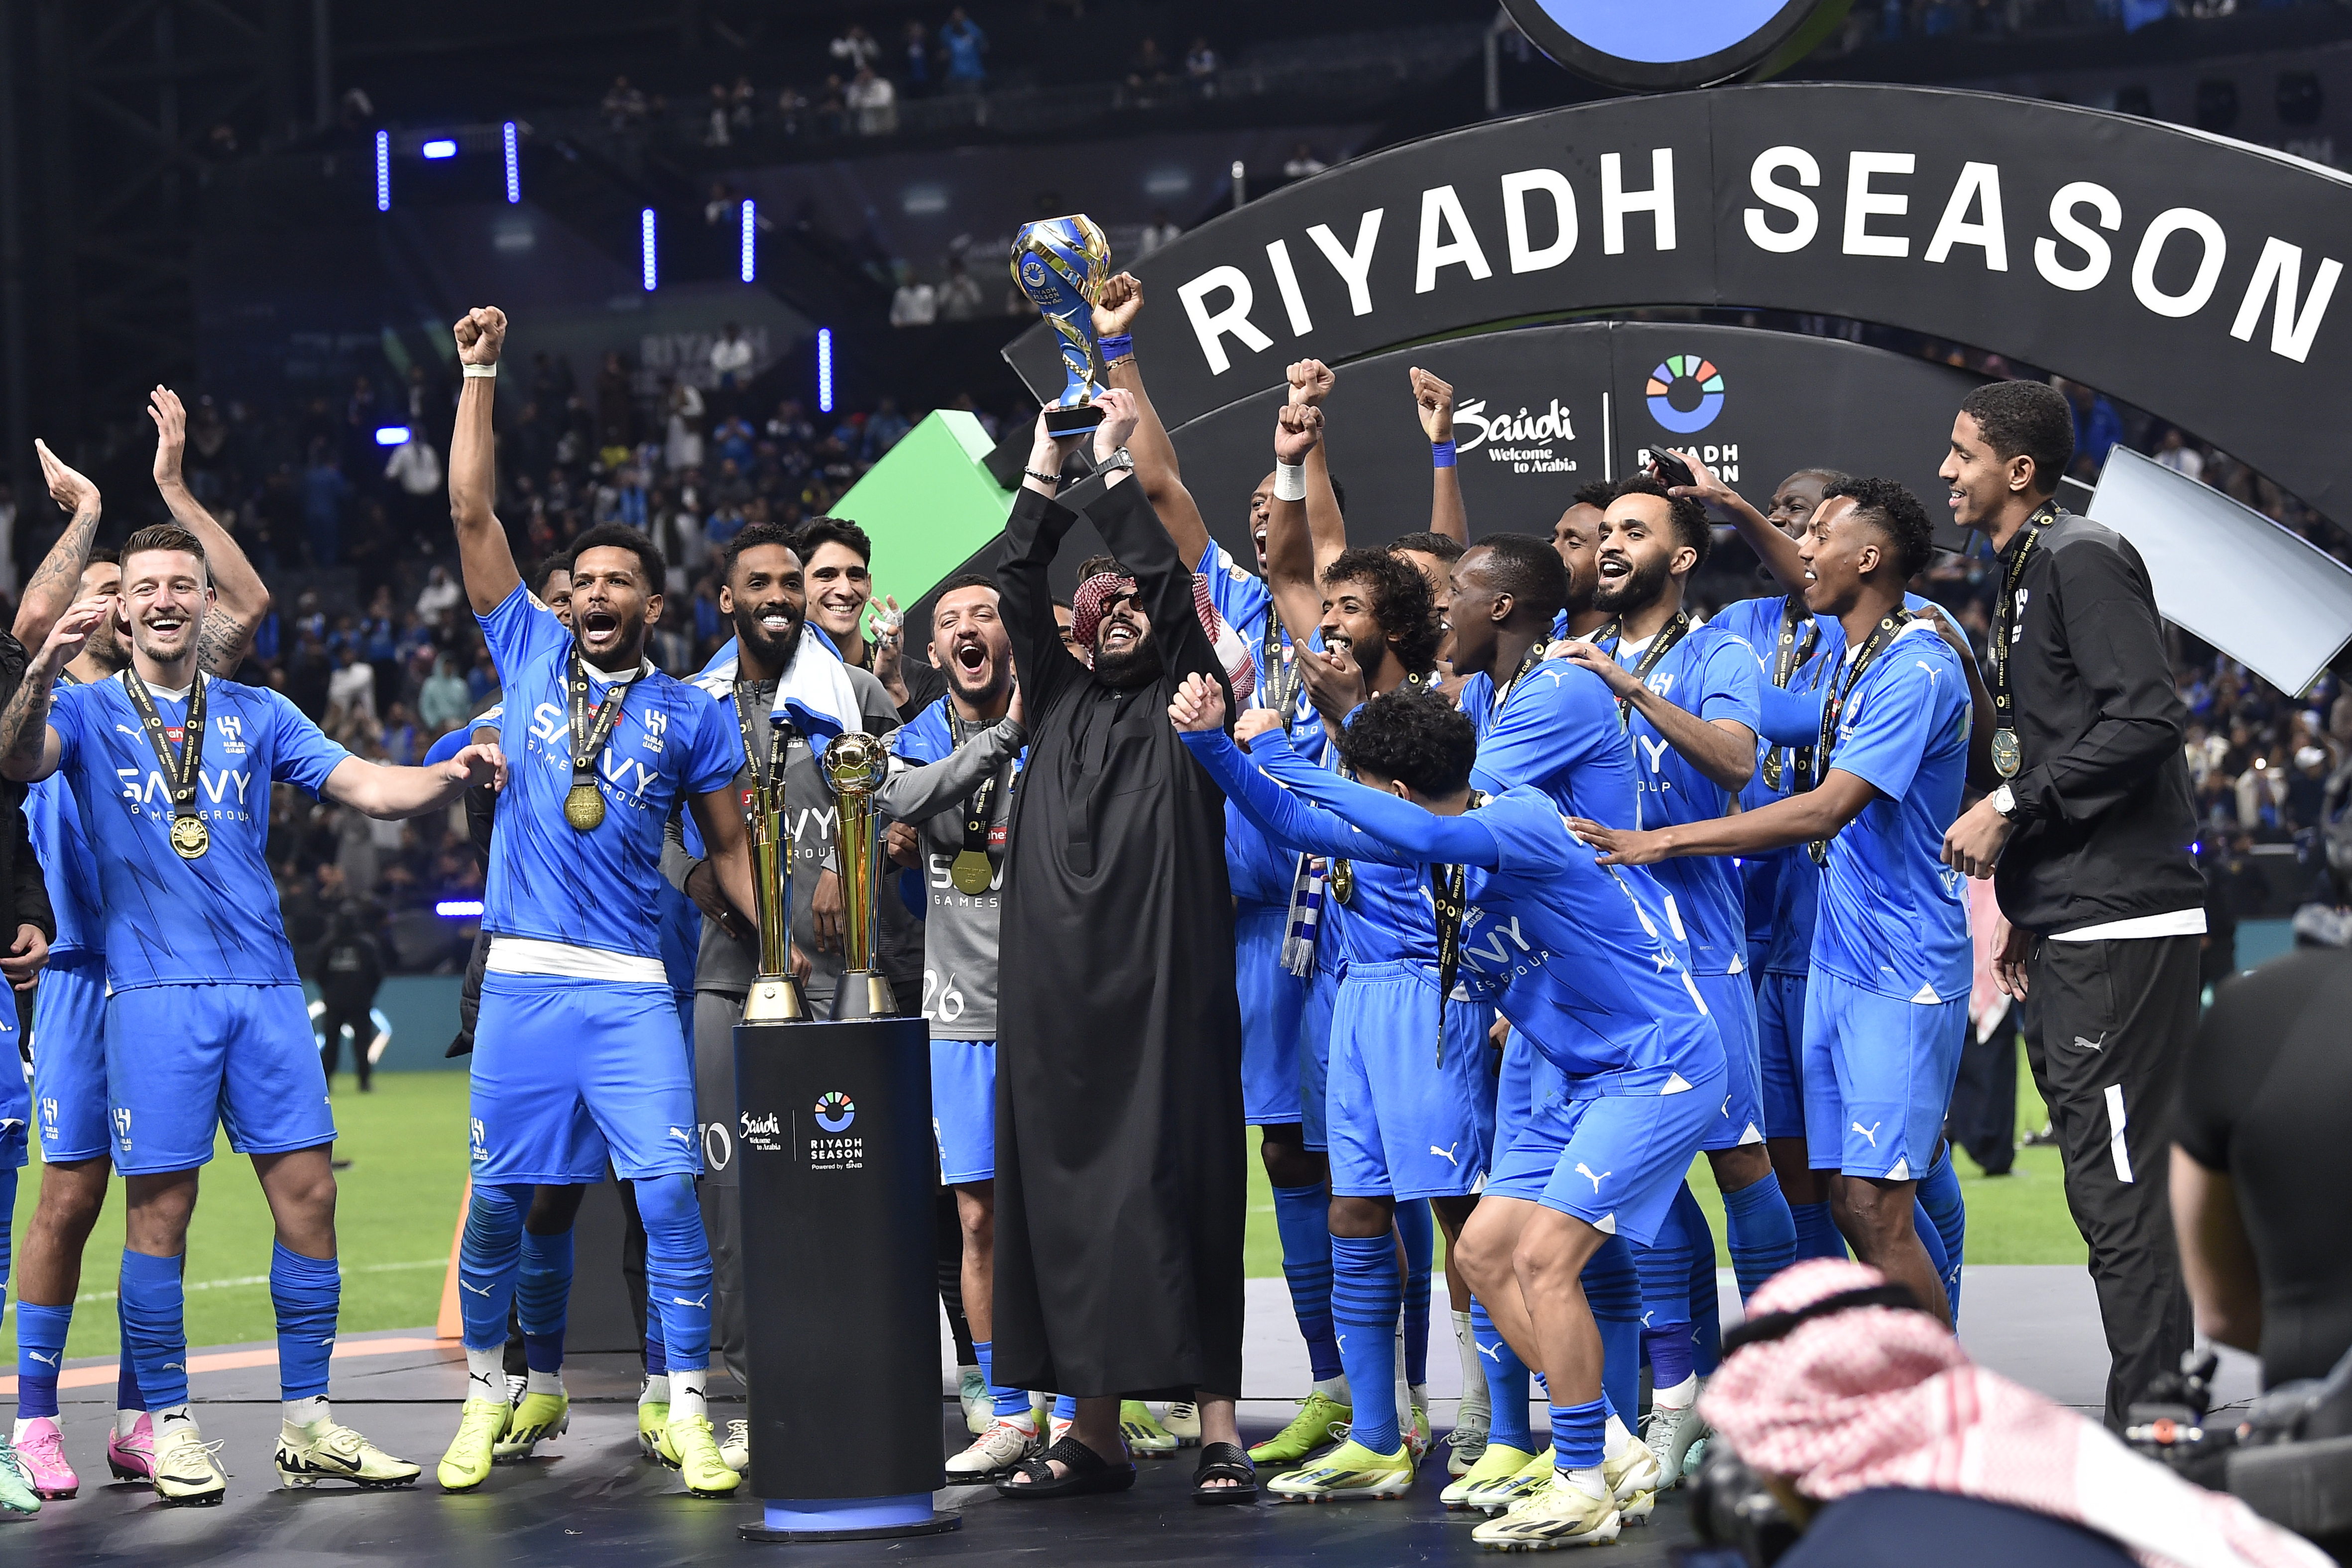 Saudi soccer club Al Hilal aims for world record wins streak after $380M  transfer spend on players | AP News